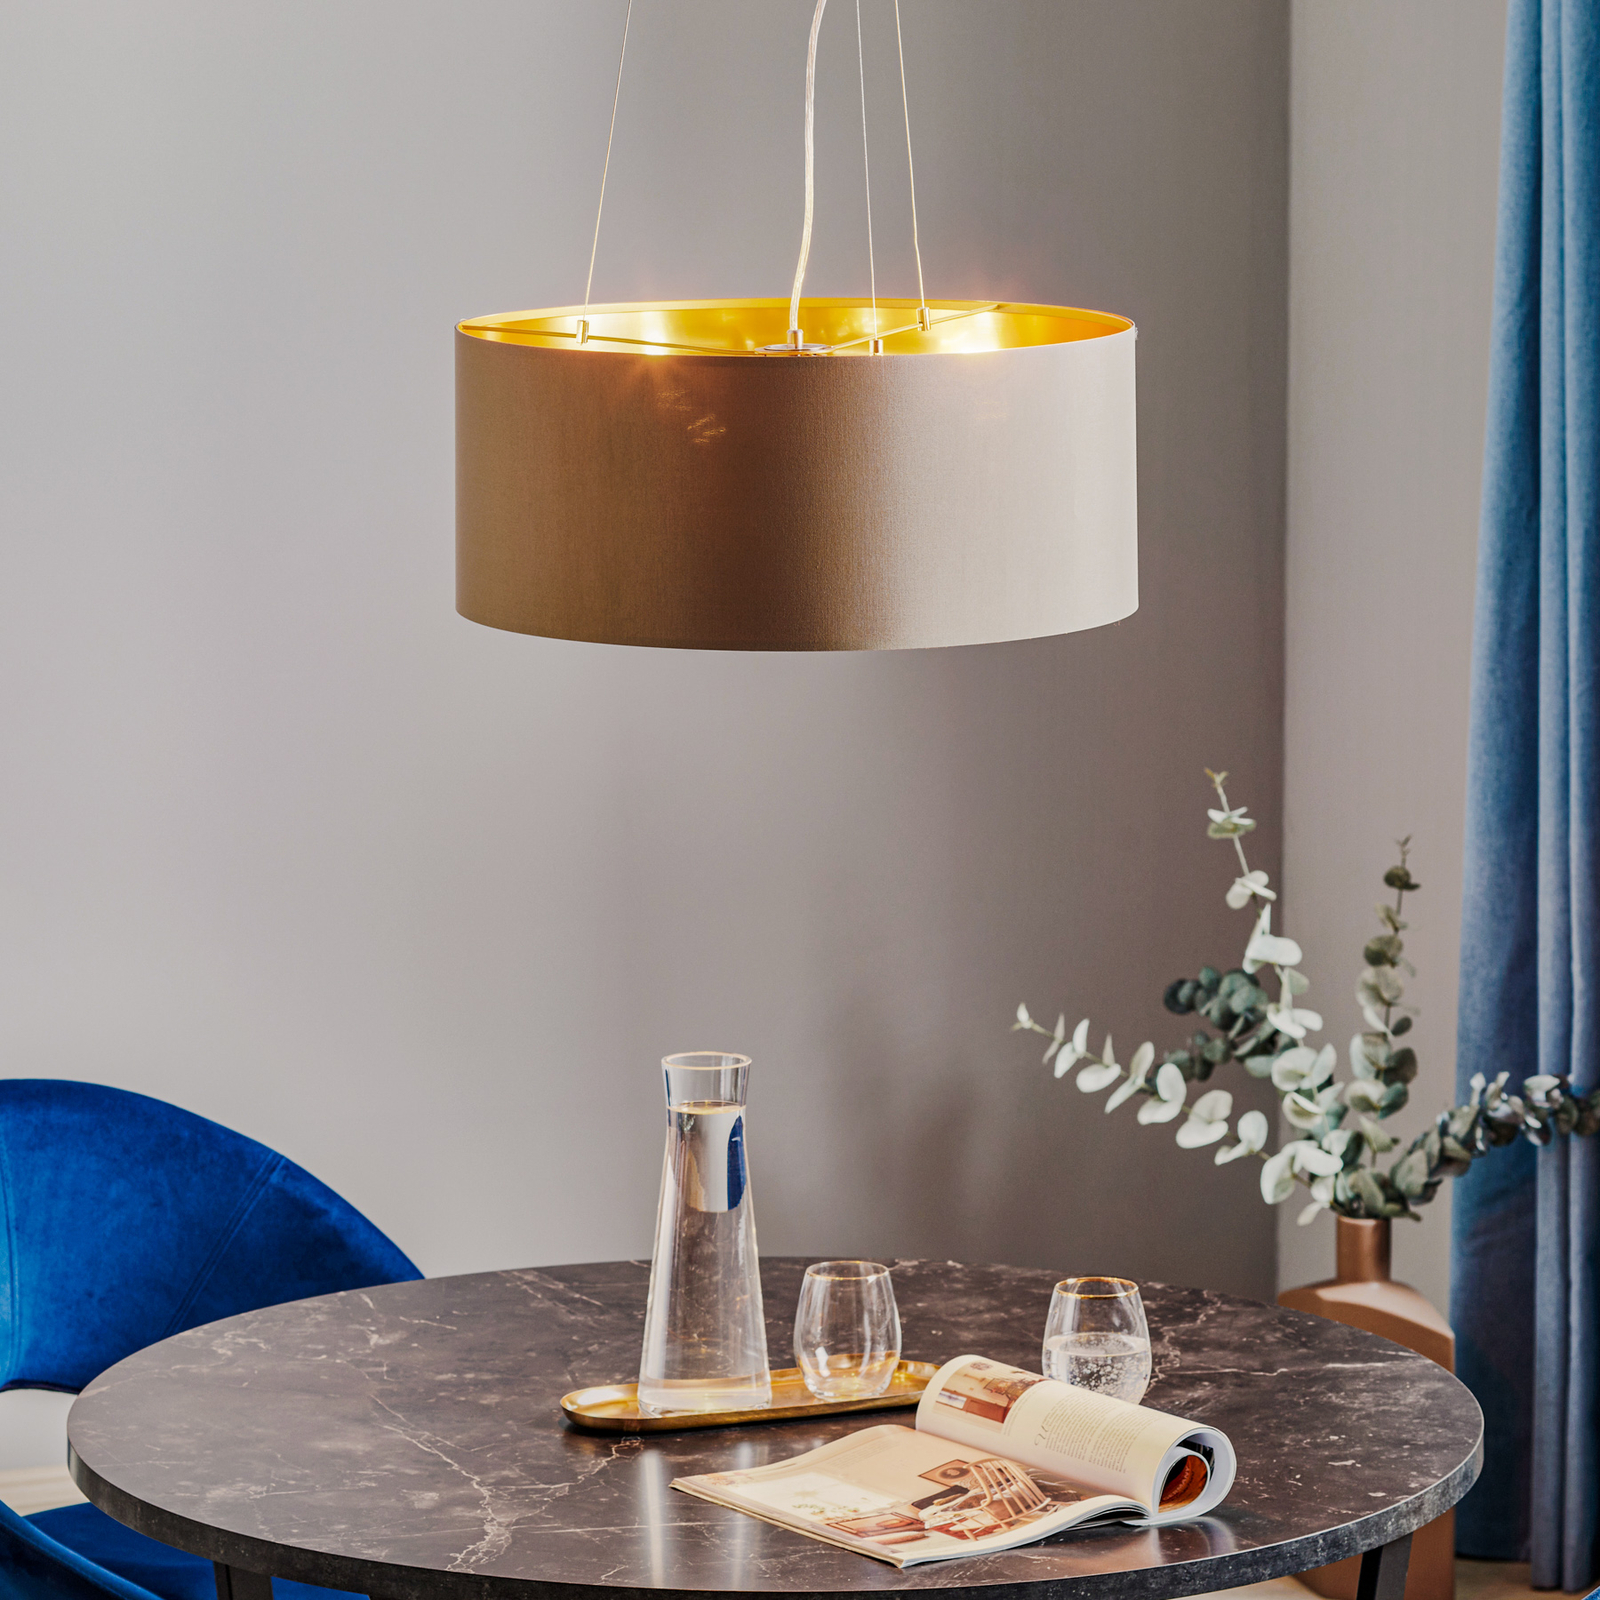 Hanglamp rond, taupe | Lampen24.be